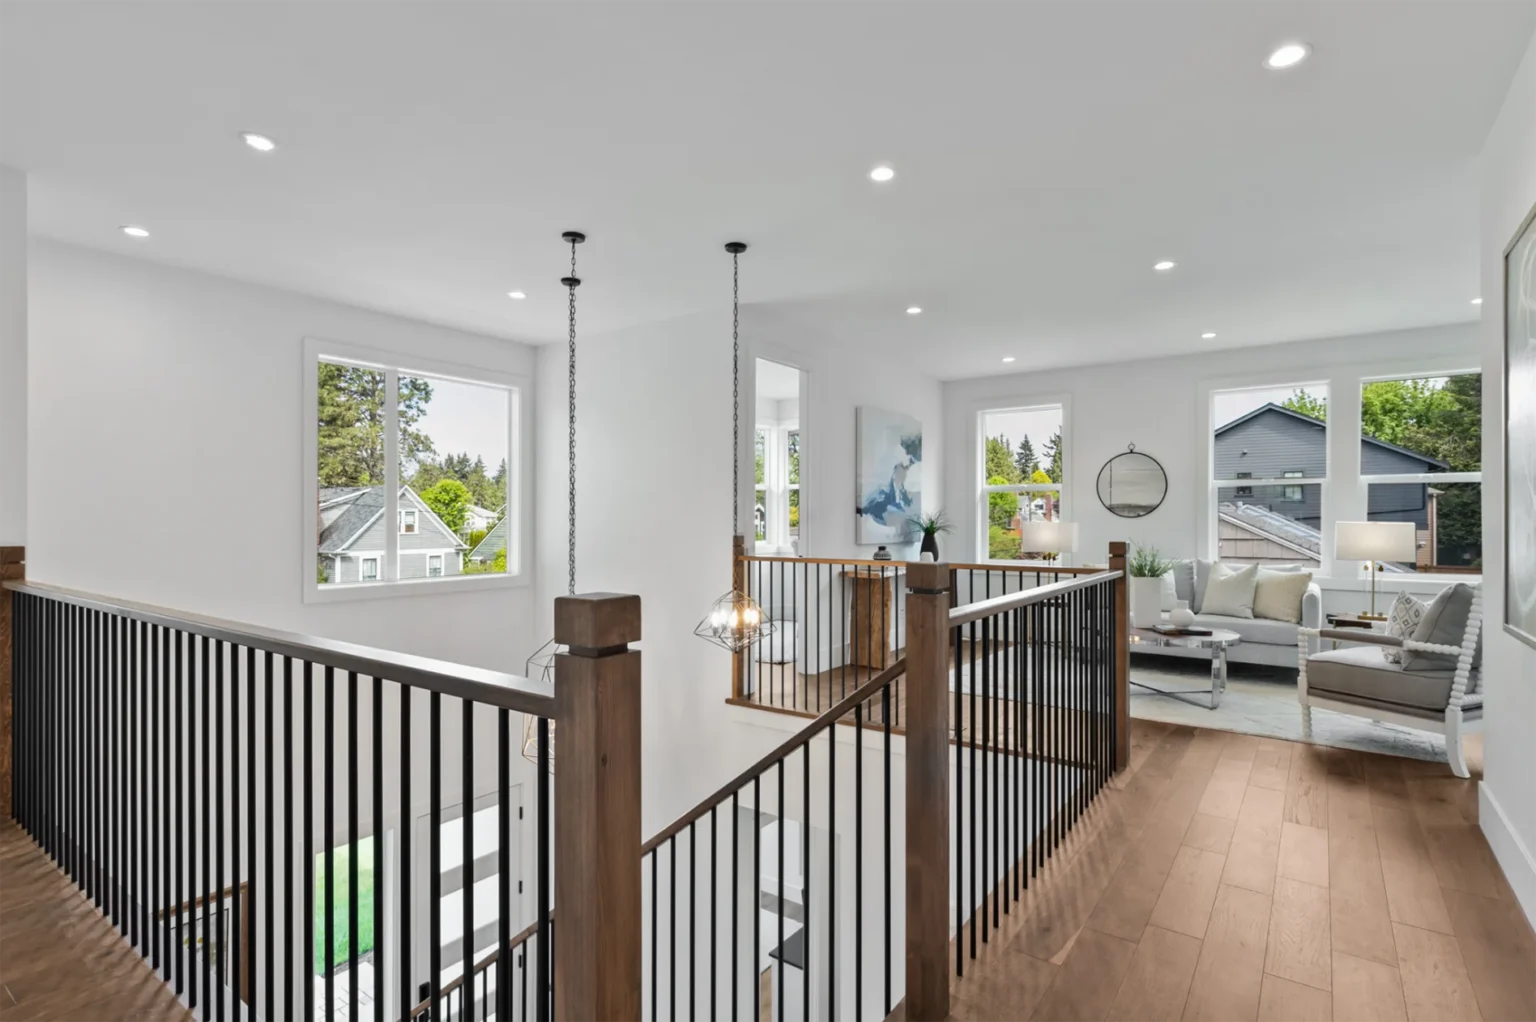 Seattle Transitional Style Home Interior second story overlook and stairs